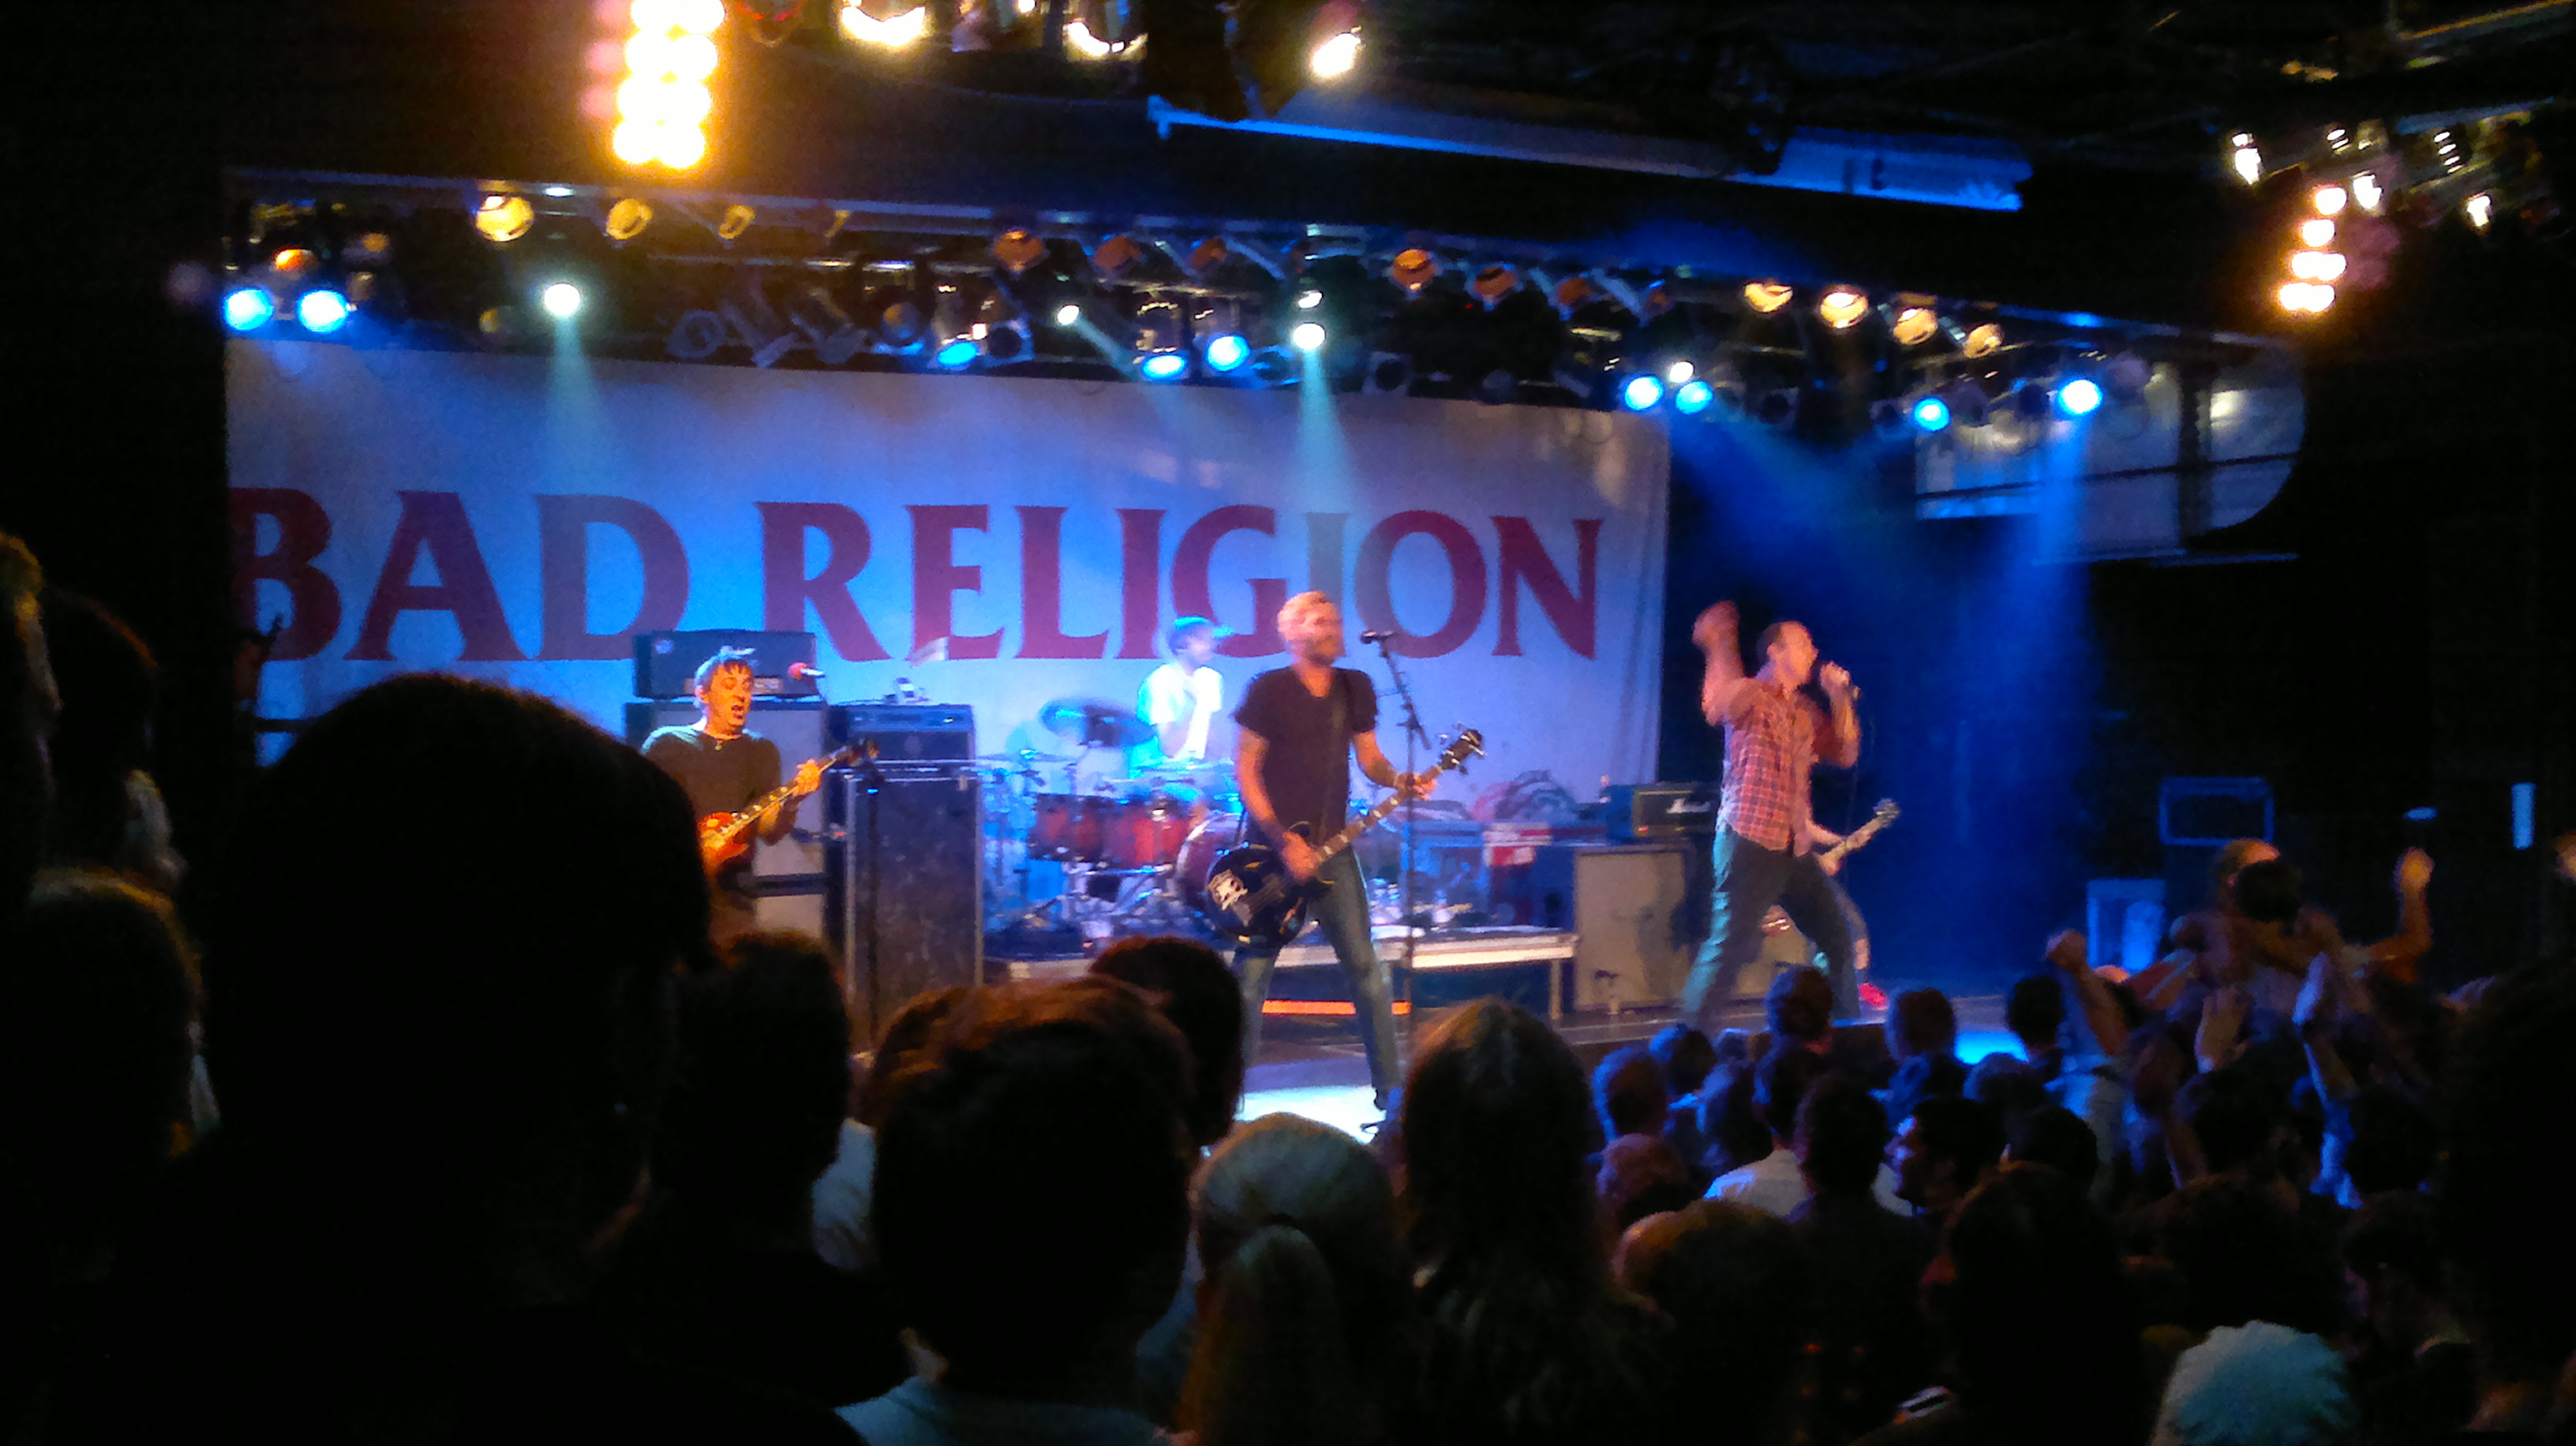 Bad Religion before a sold out show in Munich. Photo: Mike Richardson